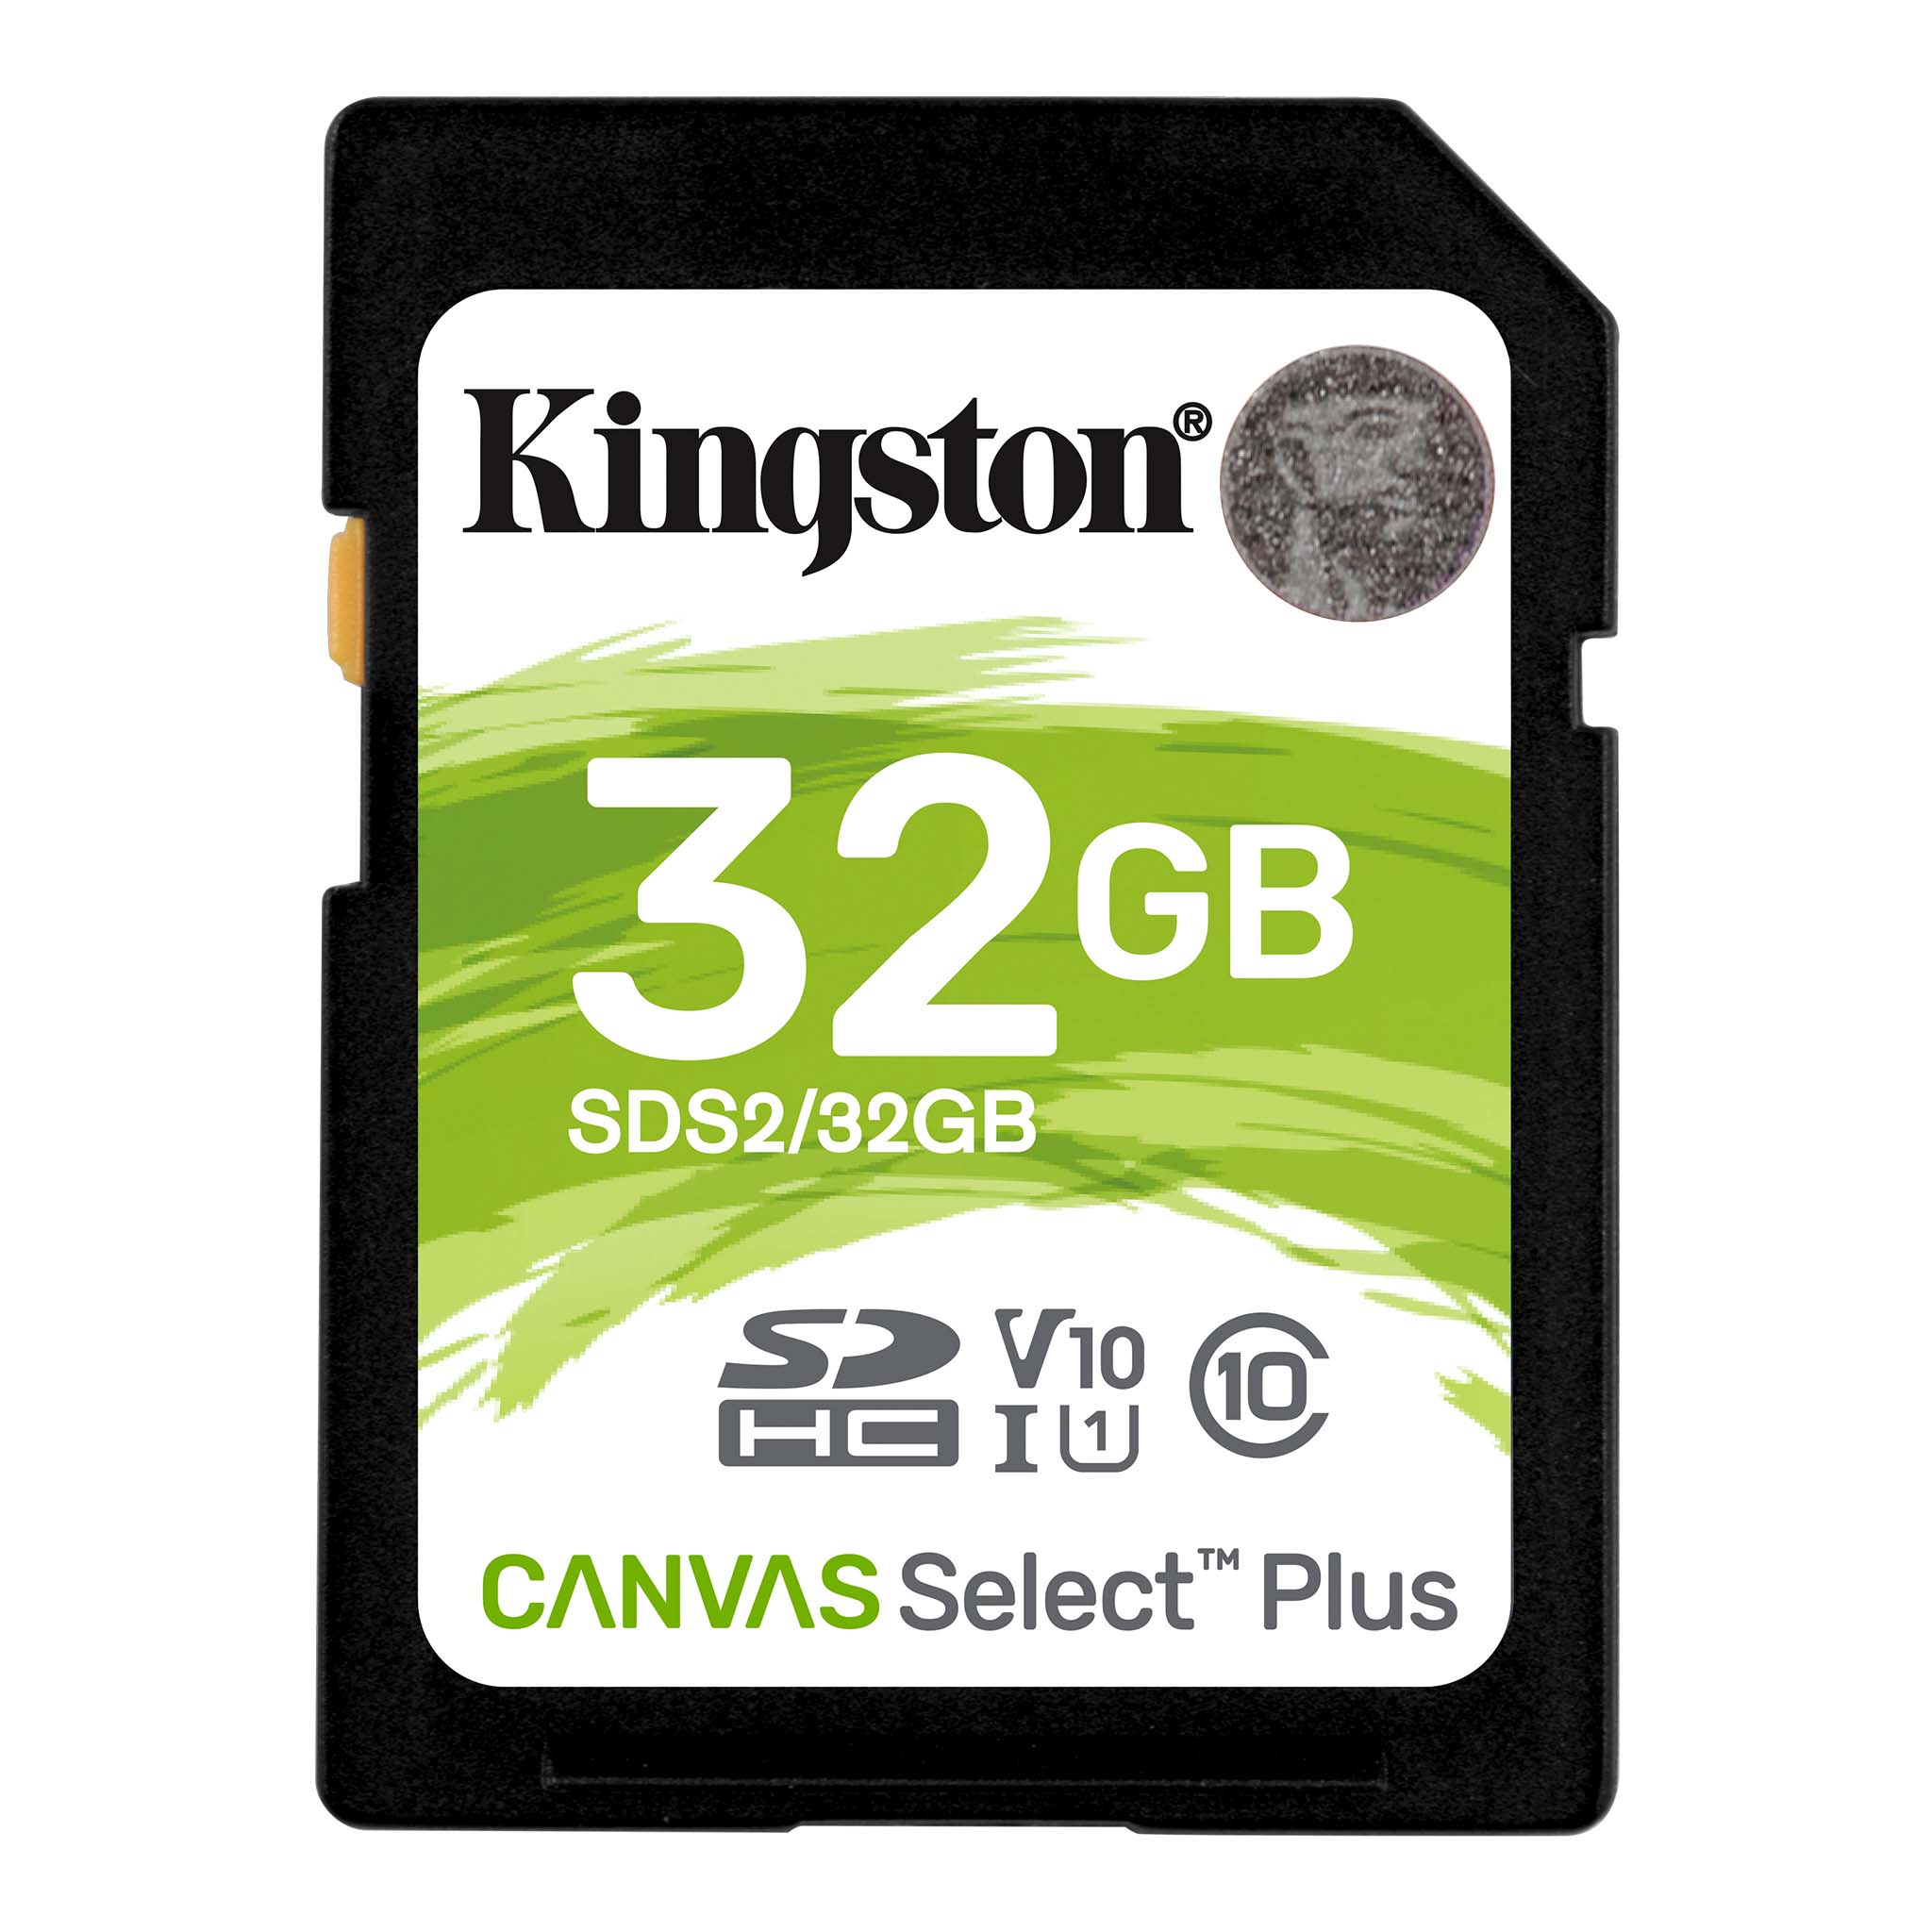 100MBs Works with Kingston Kingston 32GB Huawei Y6 Pro 2017 MicroSDHC Canvas Select Plus Card Verified by SanFlash. 